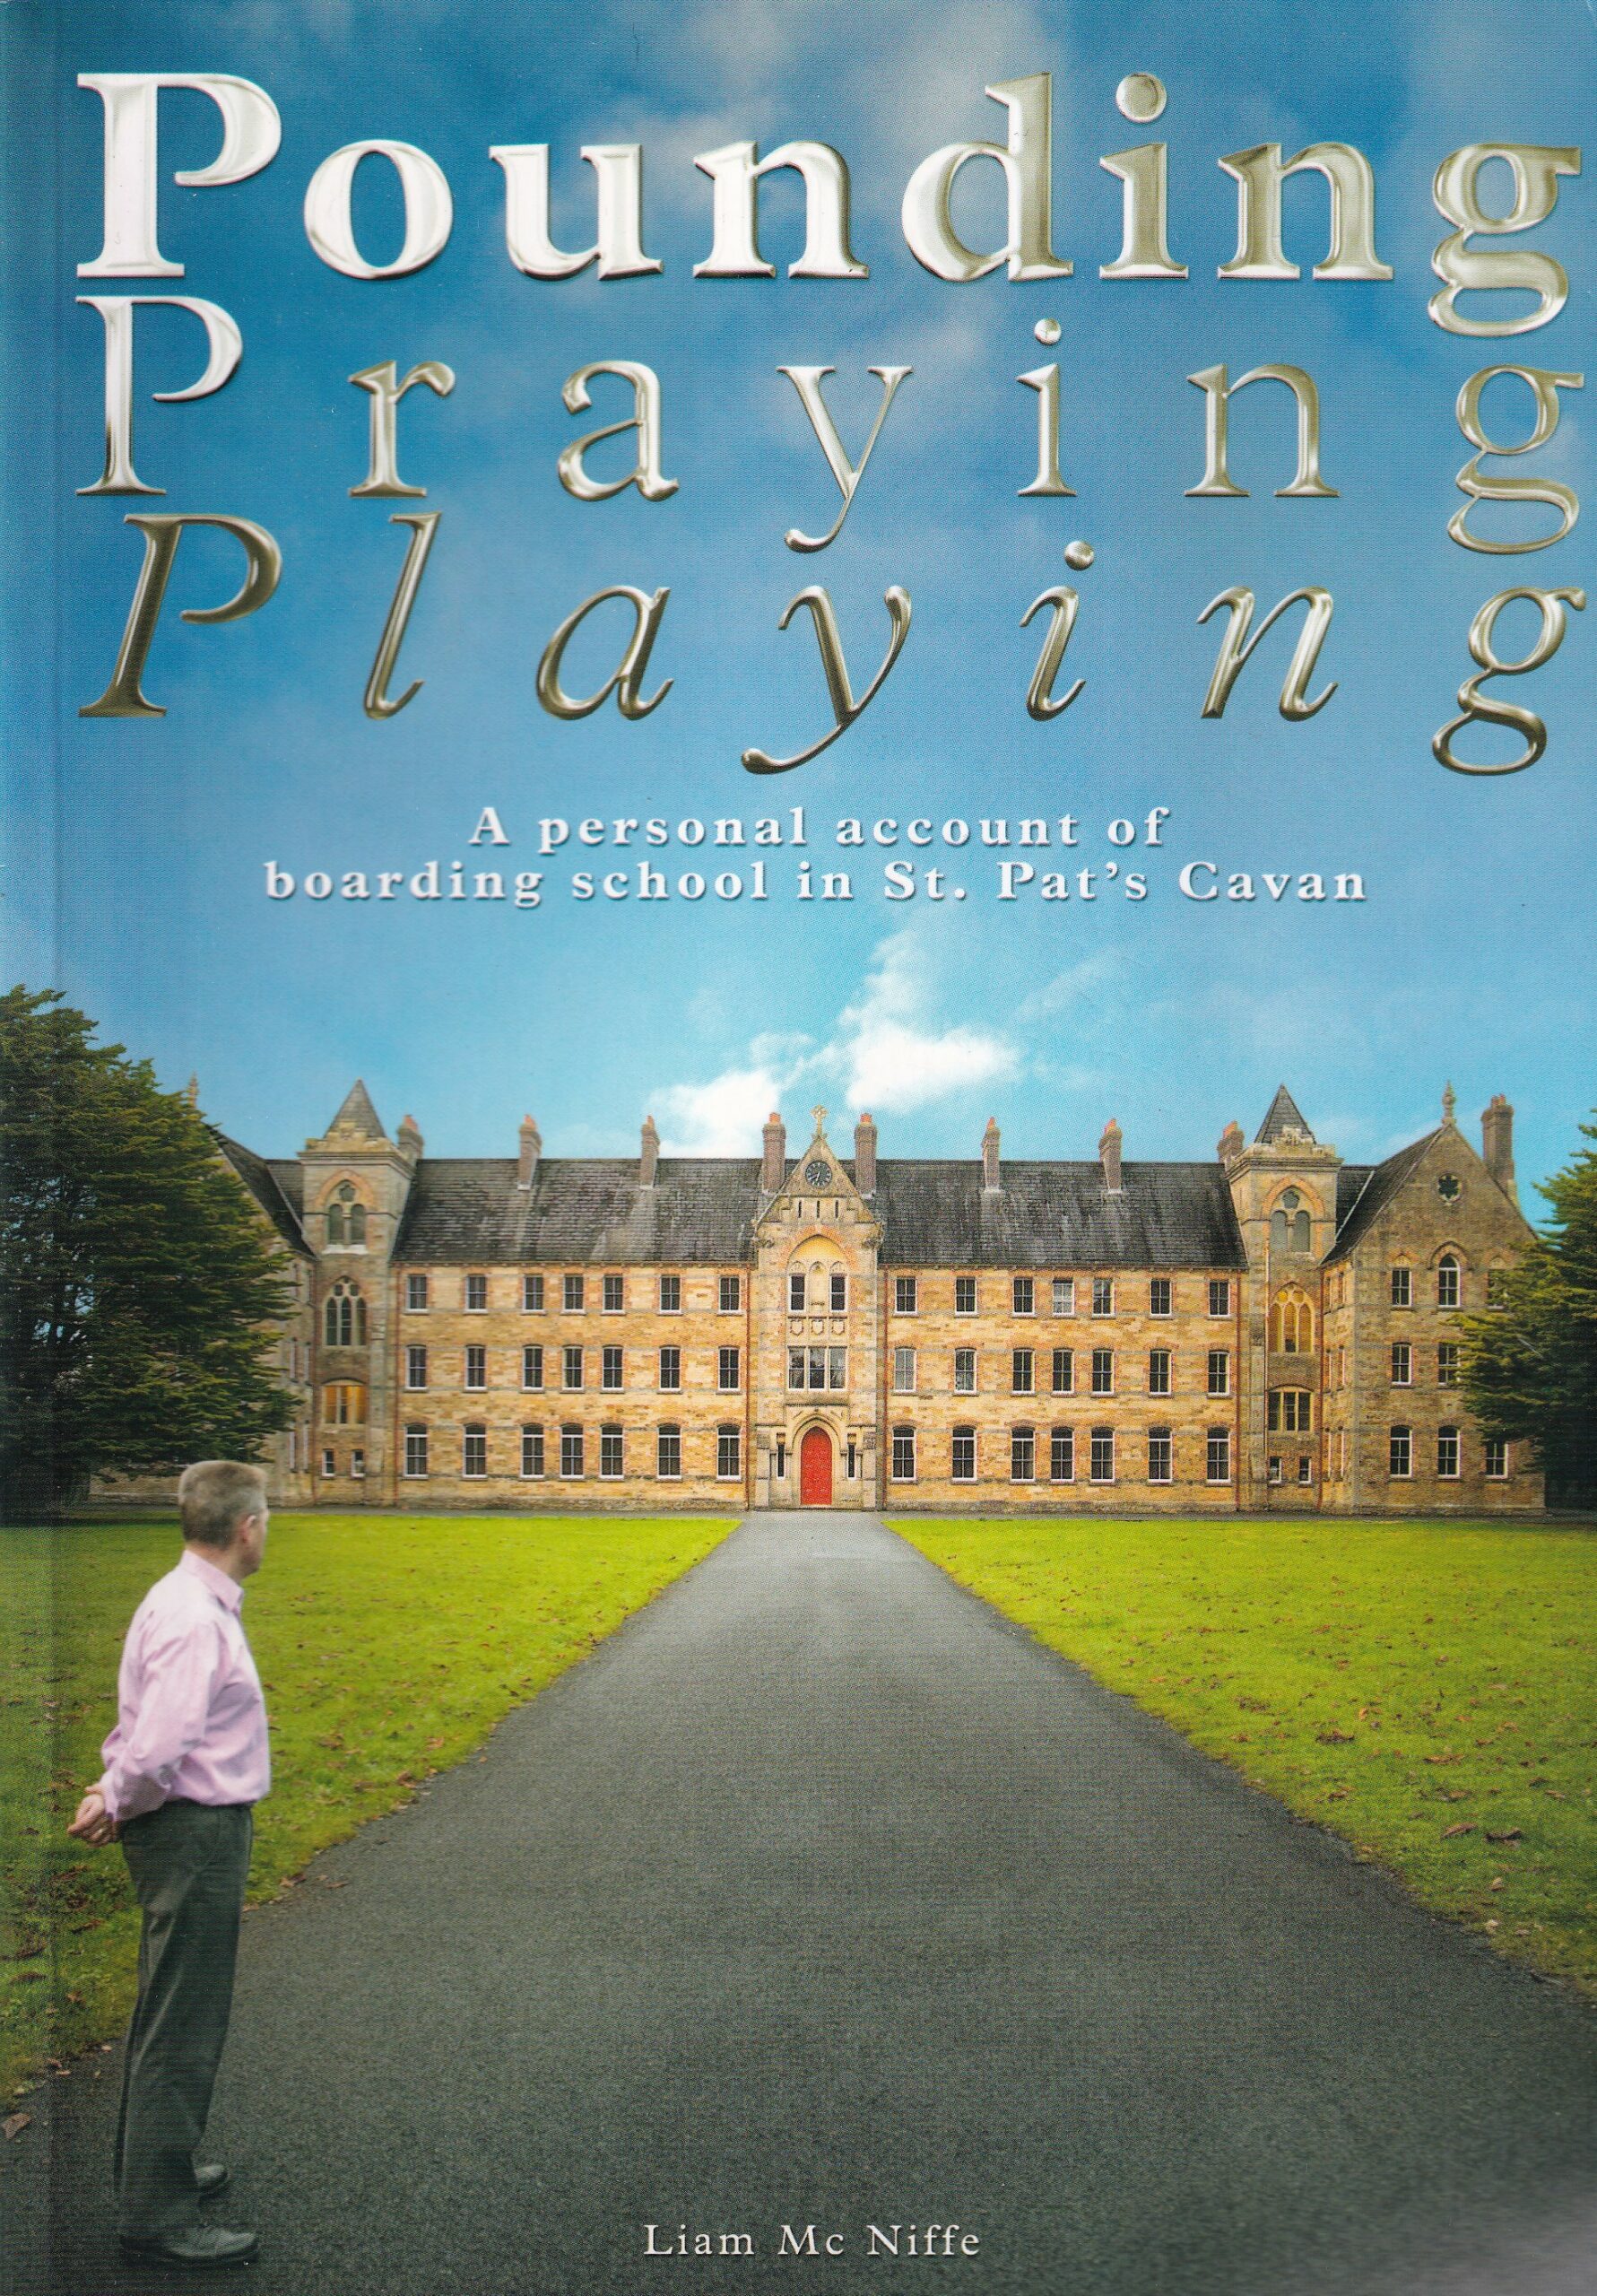 Pounding, Praying, Playing: A Personal Account of Boarding School in St. Pat’s Cavan by Liam Mc Niffe